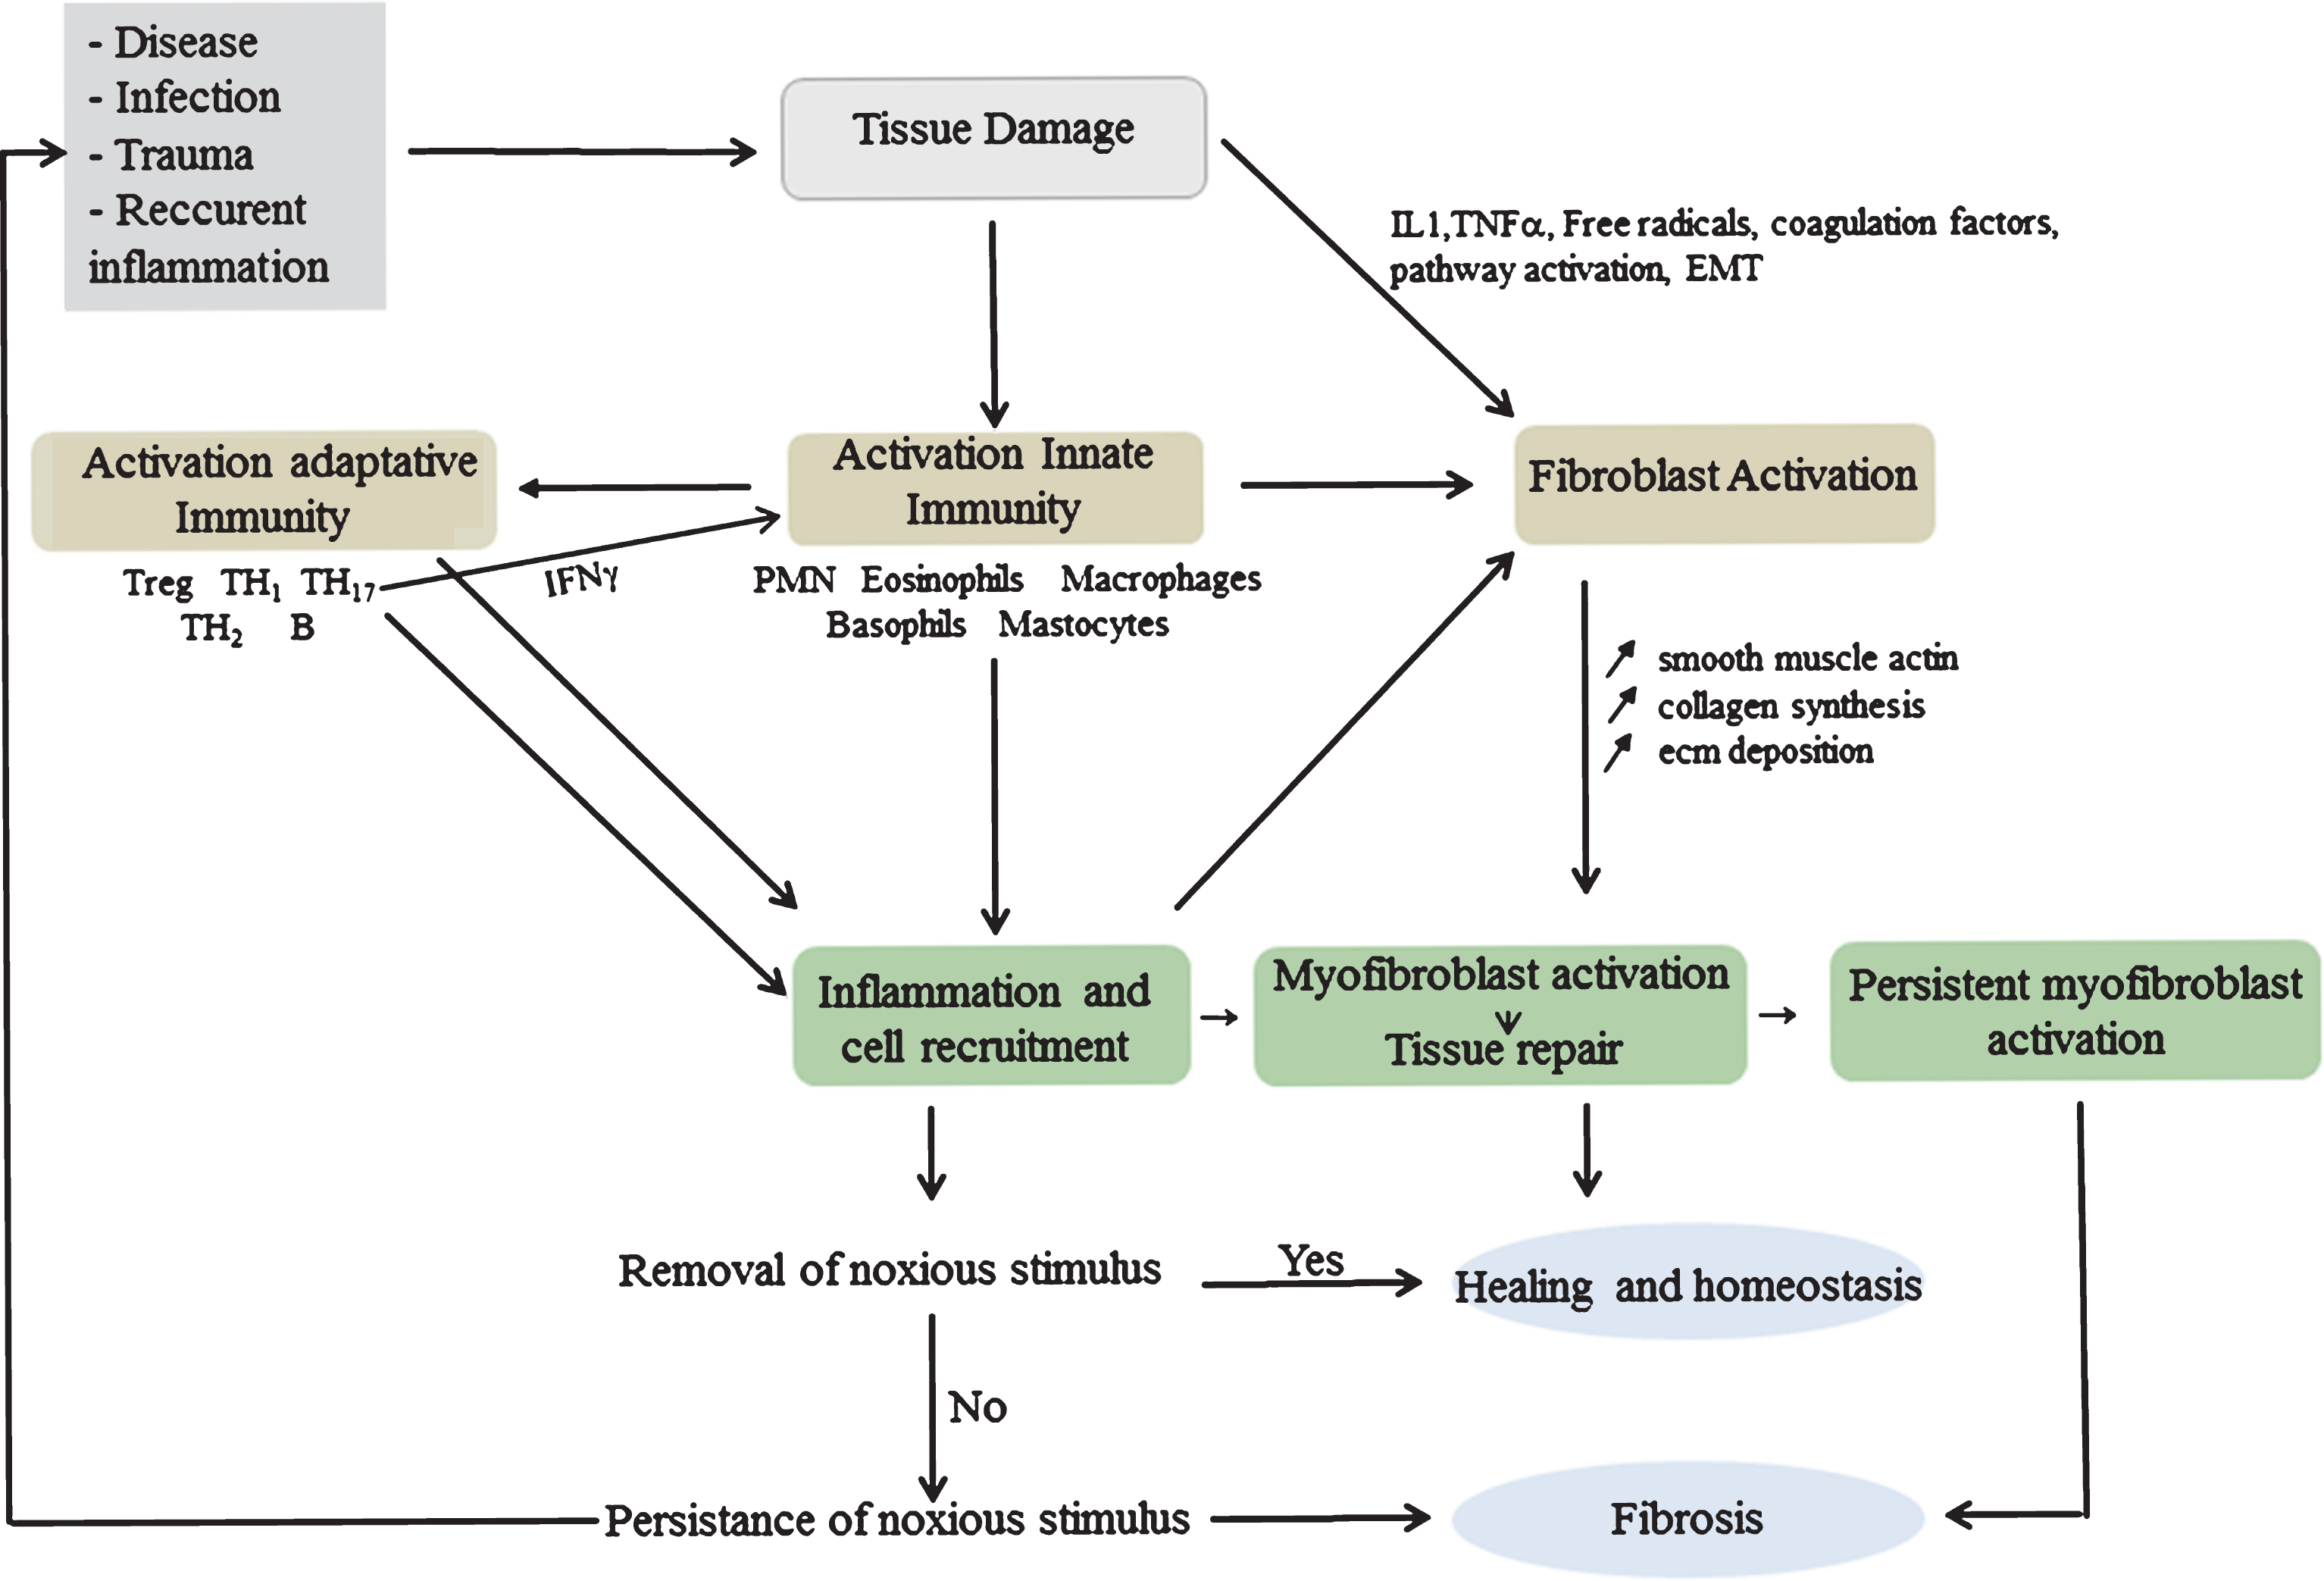 Schematic representation showing the involvement of inflammatory cells in the regulation of myofibroblast activation in wound healing and fibrosis. Tissue injury triggers a cascade of interconnected steps to restore tissue homeostasis. The initial activation of coagulation pathway is followed by an acute inflammation and activation of innate immune mediators including macrophages, neutrophils and dendritic cells. Cytokines liberated by injured and inflammatory cells subsequently regulate the activation of adaptive immune response. Inflammatory cells and immune mediators attempt to eliminate noxious stimuli and activate fibroblasts into myofibroblasts that orchestrate angiogenesis and regulation of ECM components. Failure to eliminate factors causing the injury perpetuates wound healing and inflammation ultimately resulting in fibrosis.